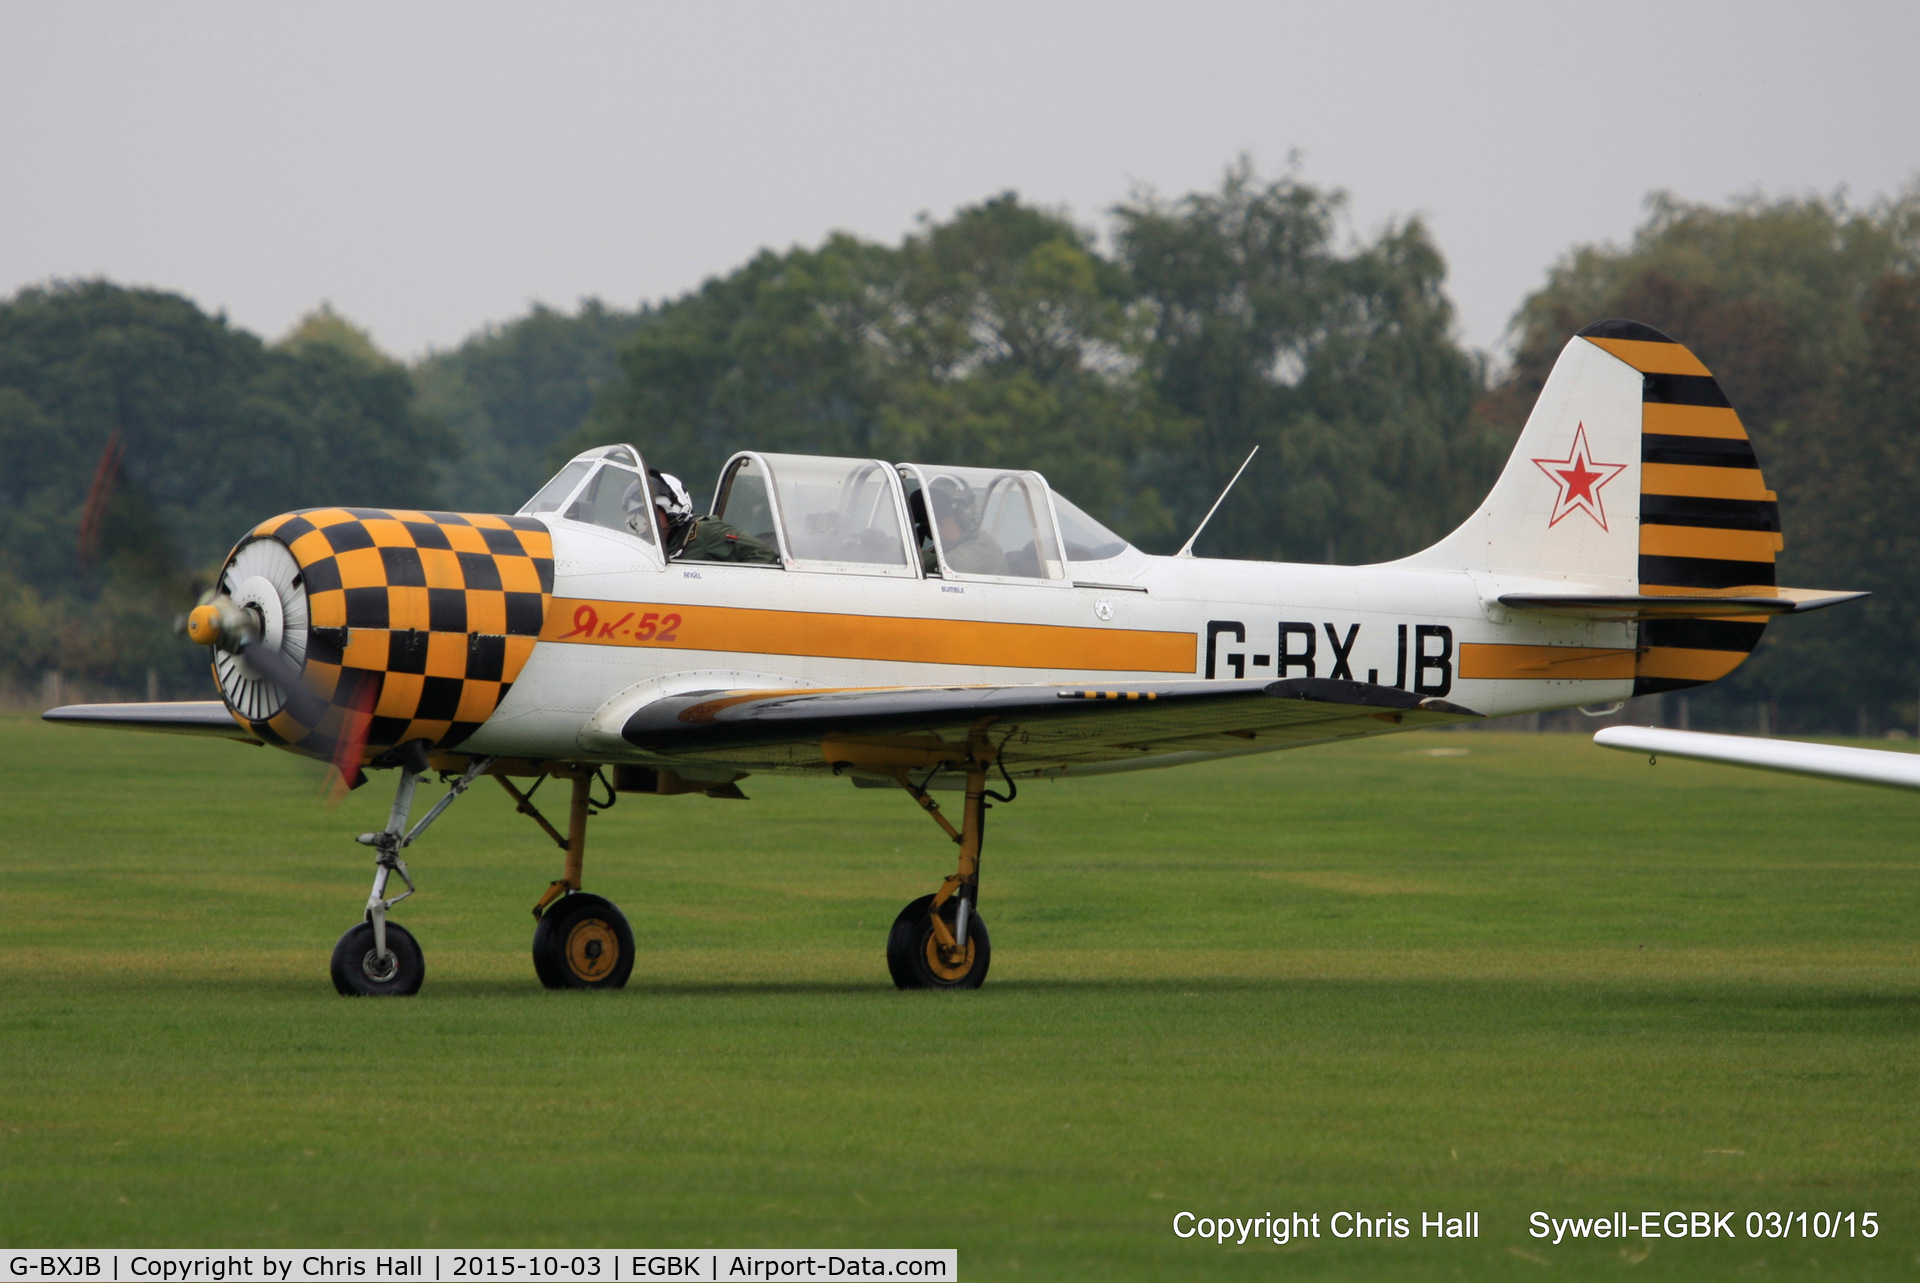 G-BXJB, 1987 Bacau Yak-52 C/N 877403, at The Radial And Training Aircraft Fly-in